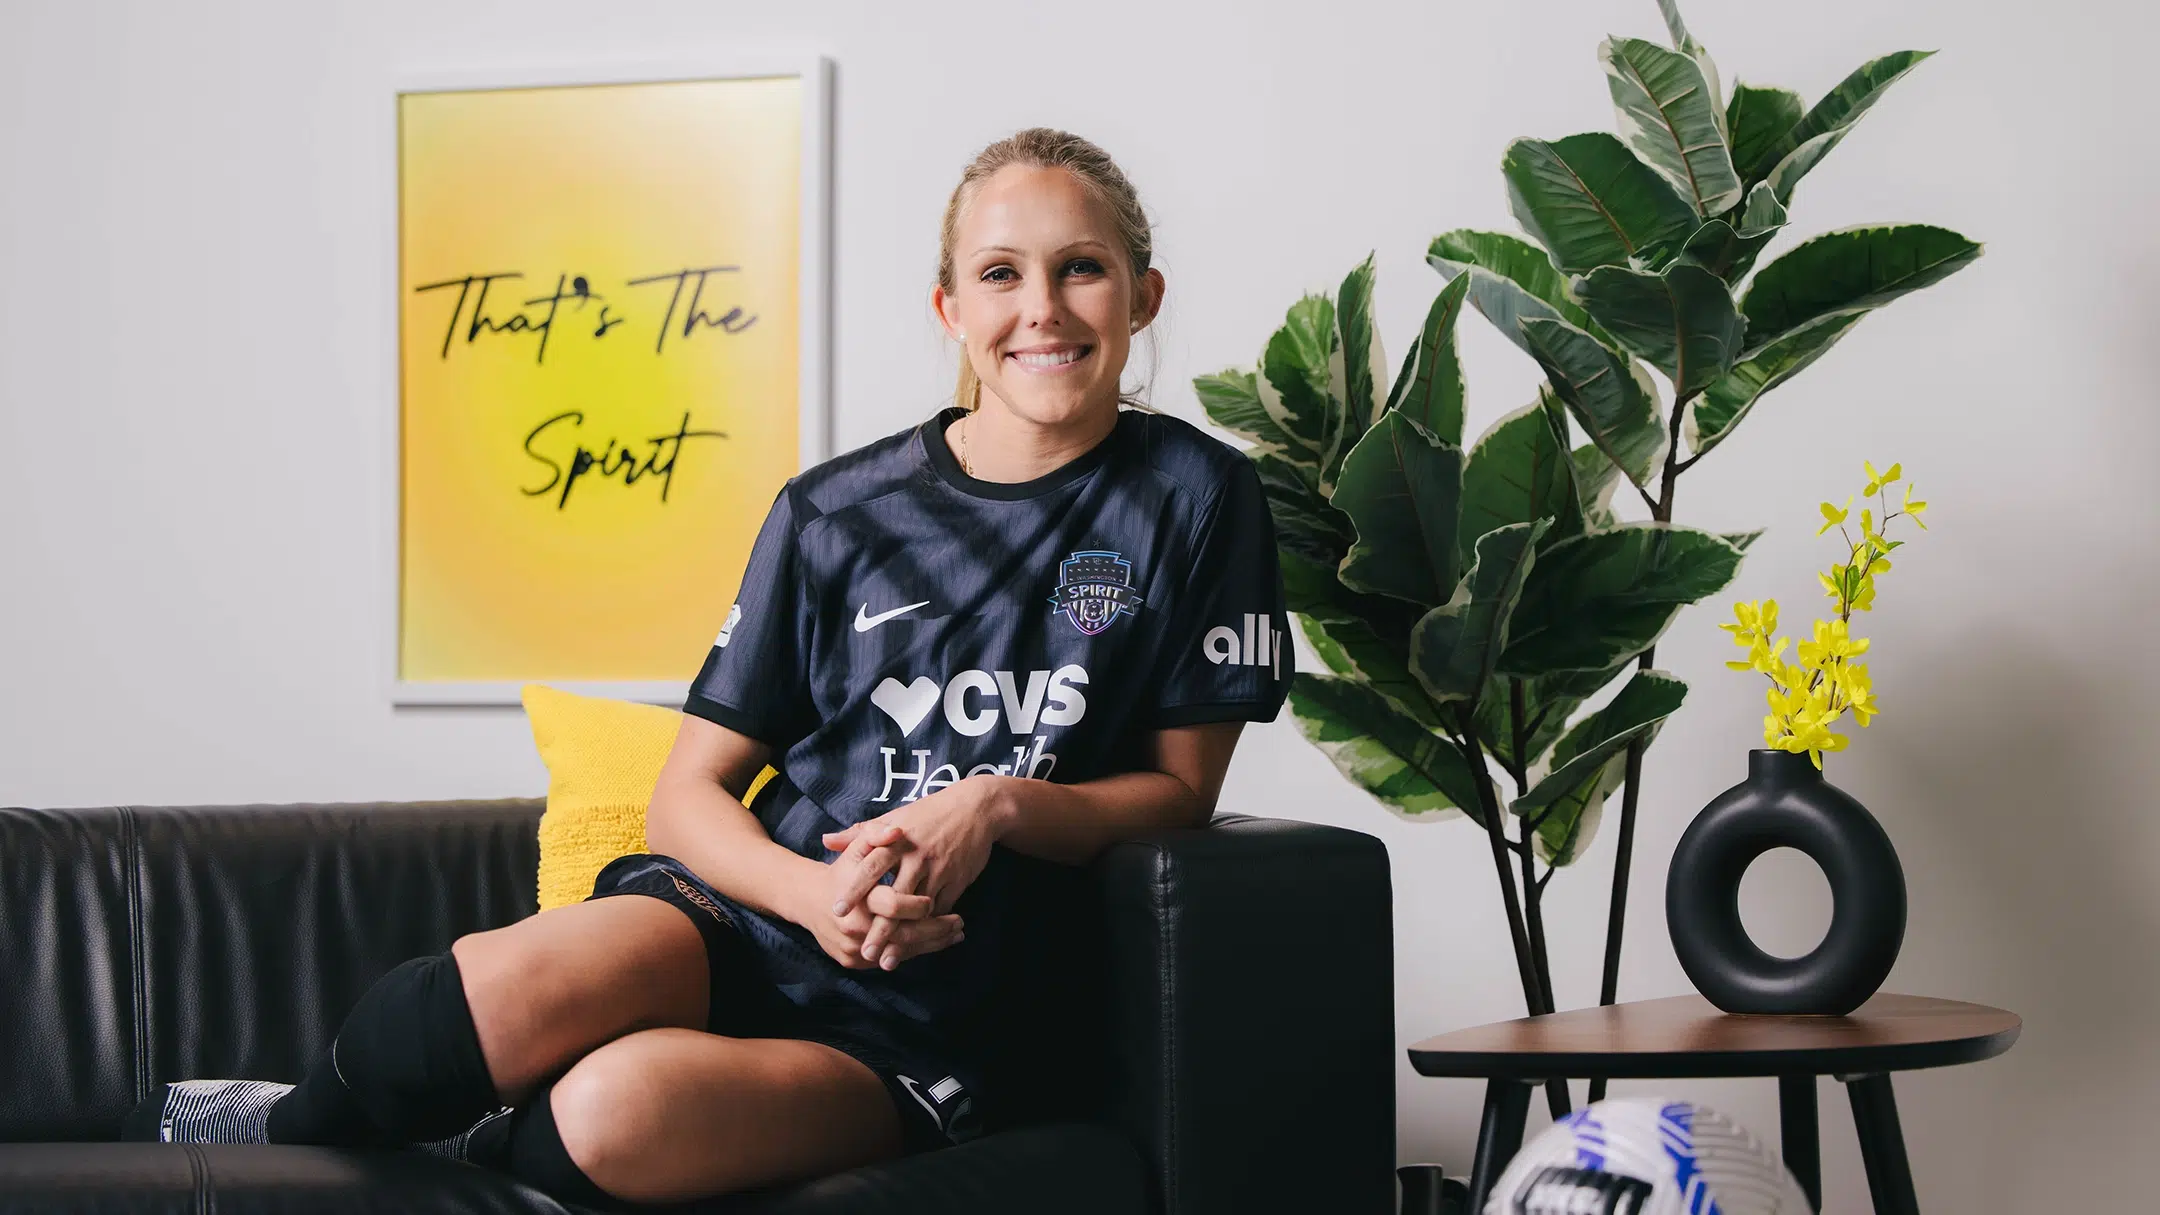 Brittany Ratcliffe sits on a black couch while wearing a black and gray Spirit kit. In the background is a green plant and a yellow, framed posted that reads "That's the Spirit".